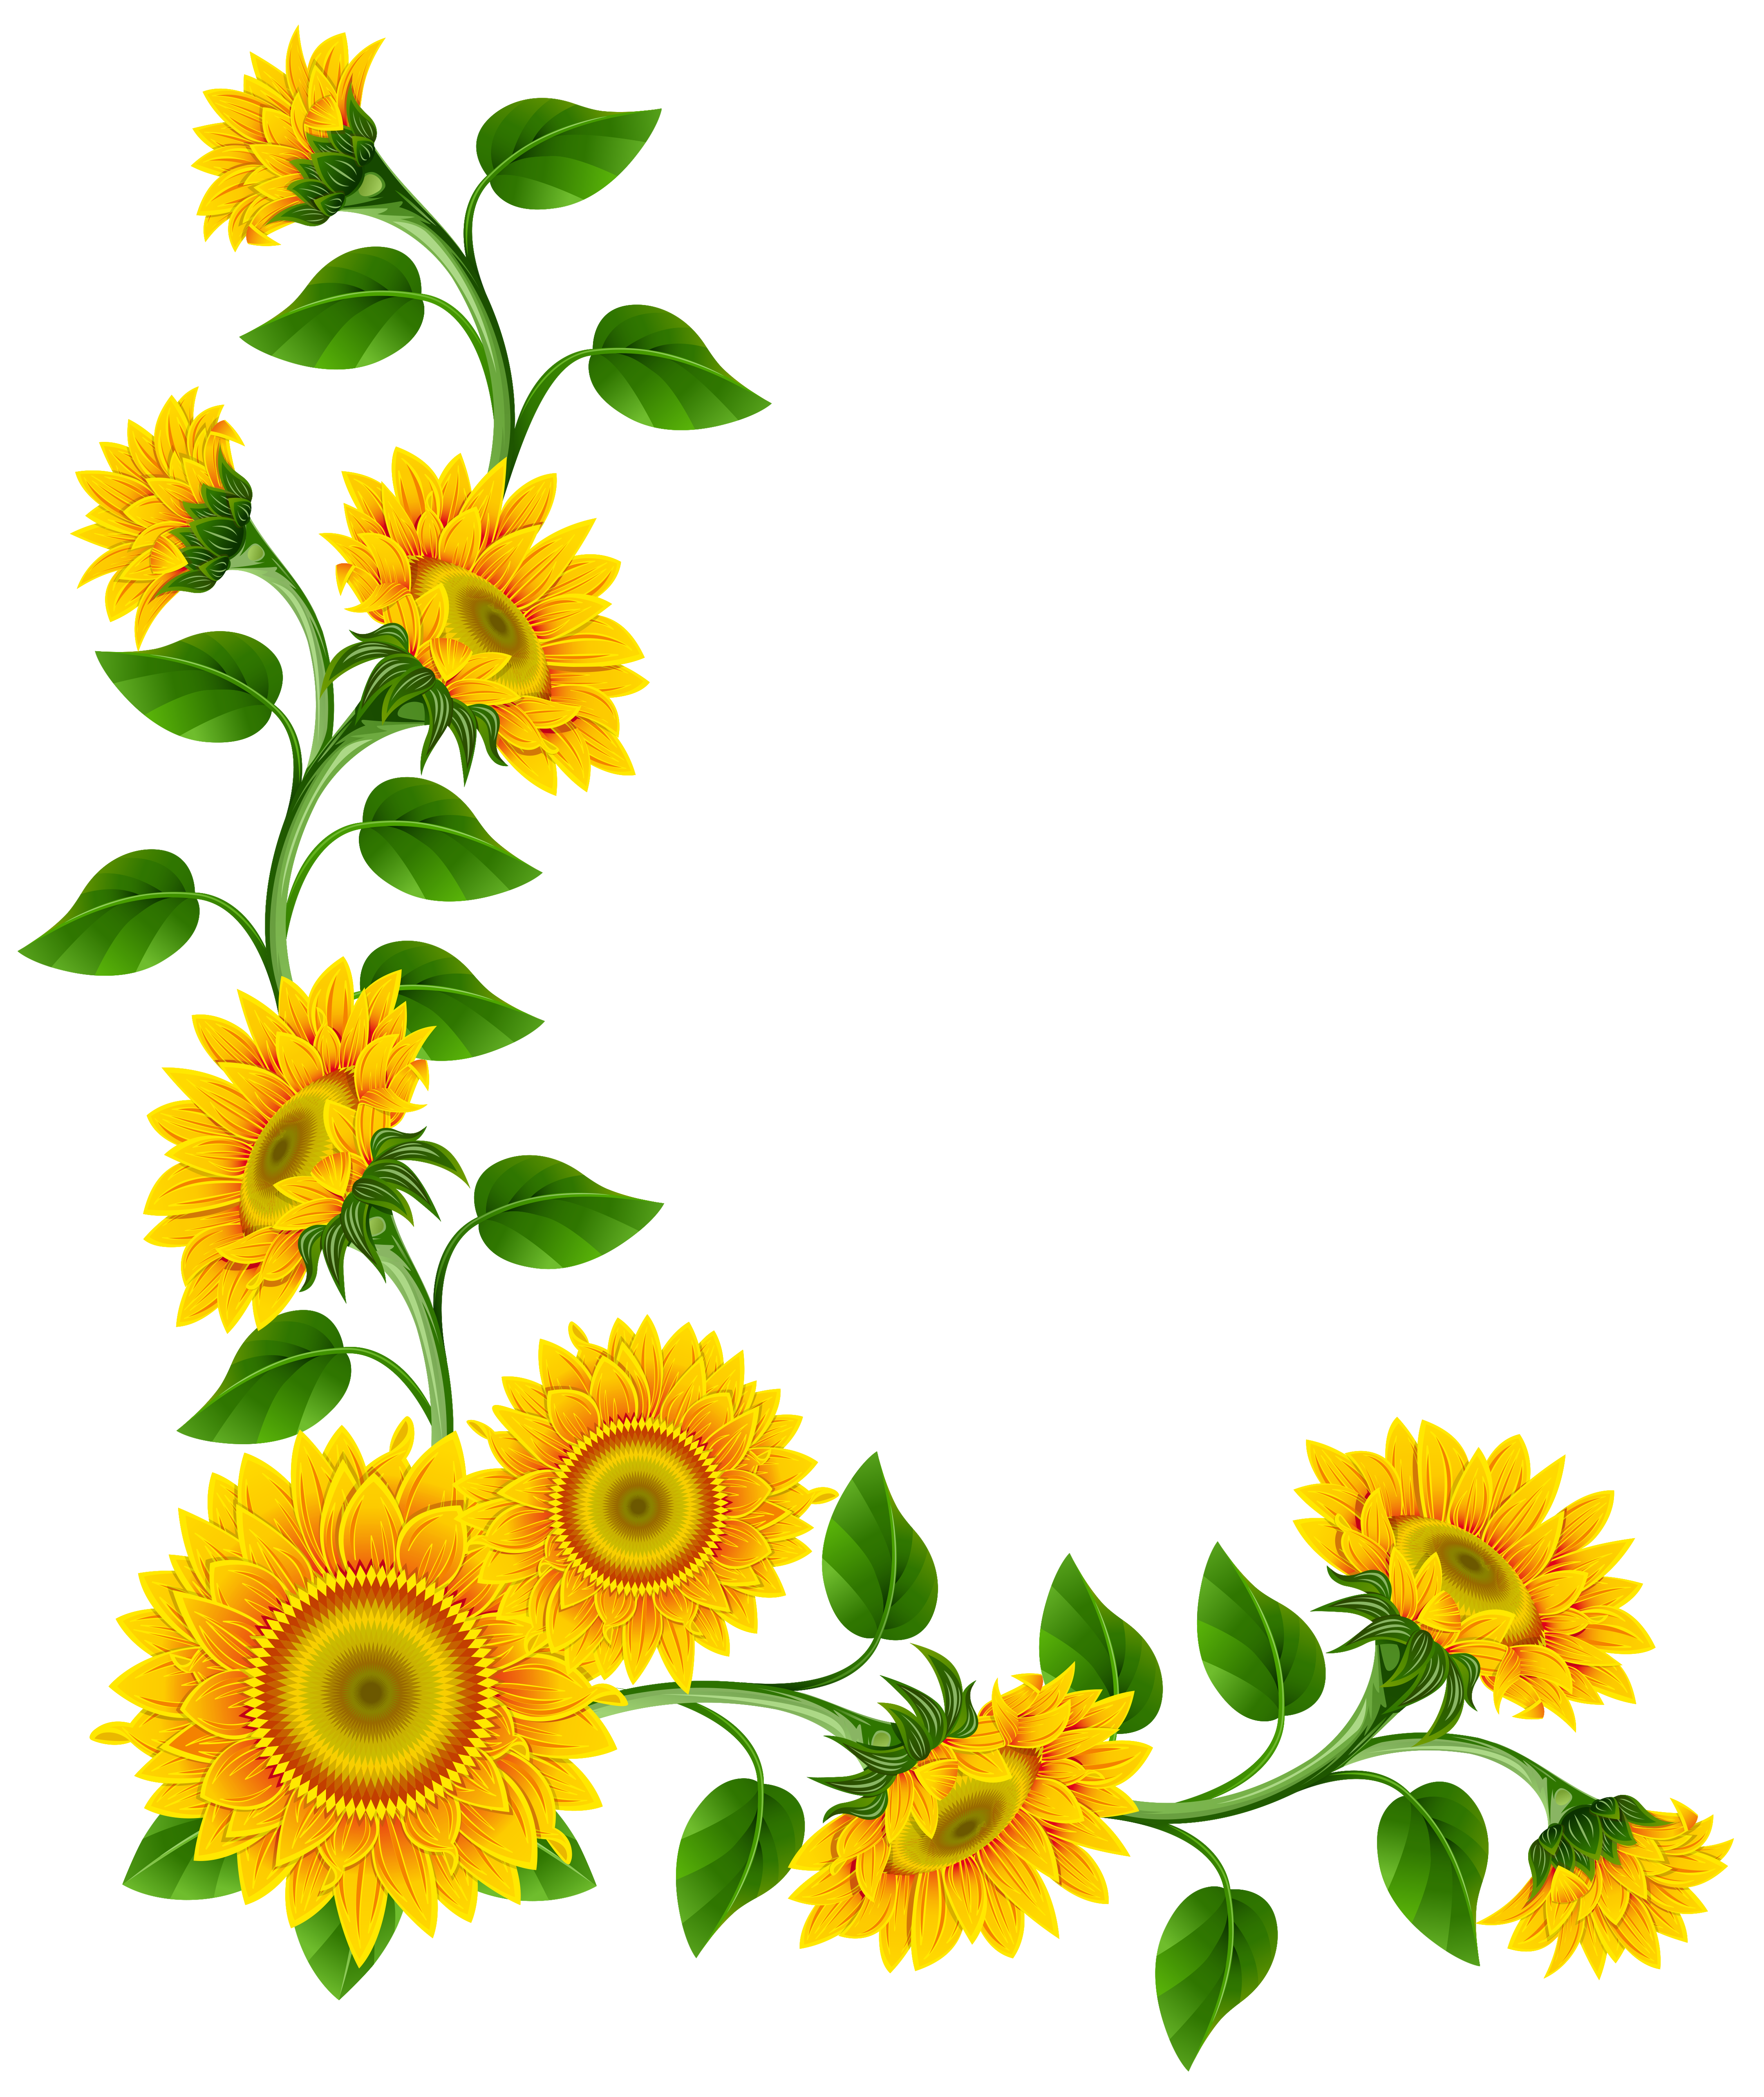 Boarder clipart sunflower. Border decoration png image